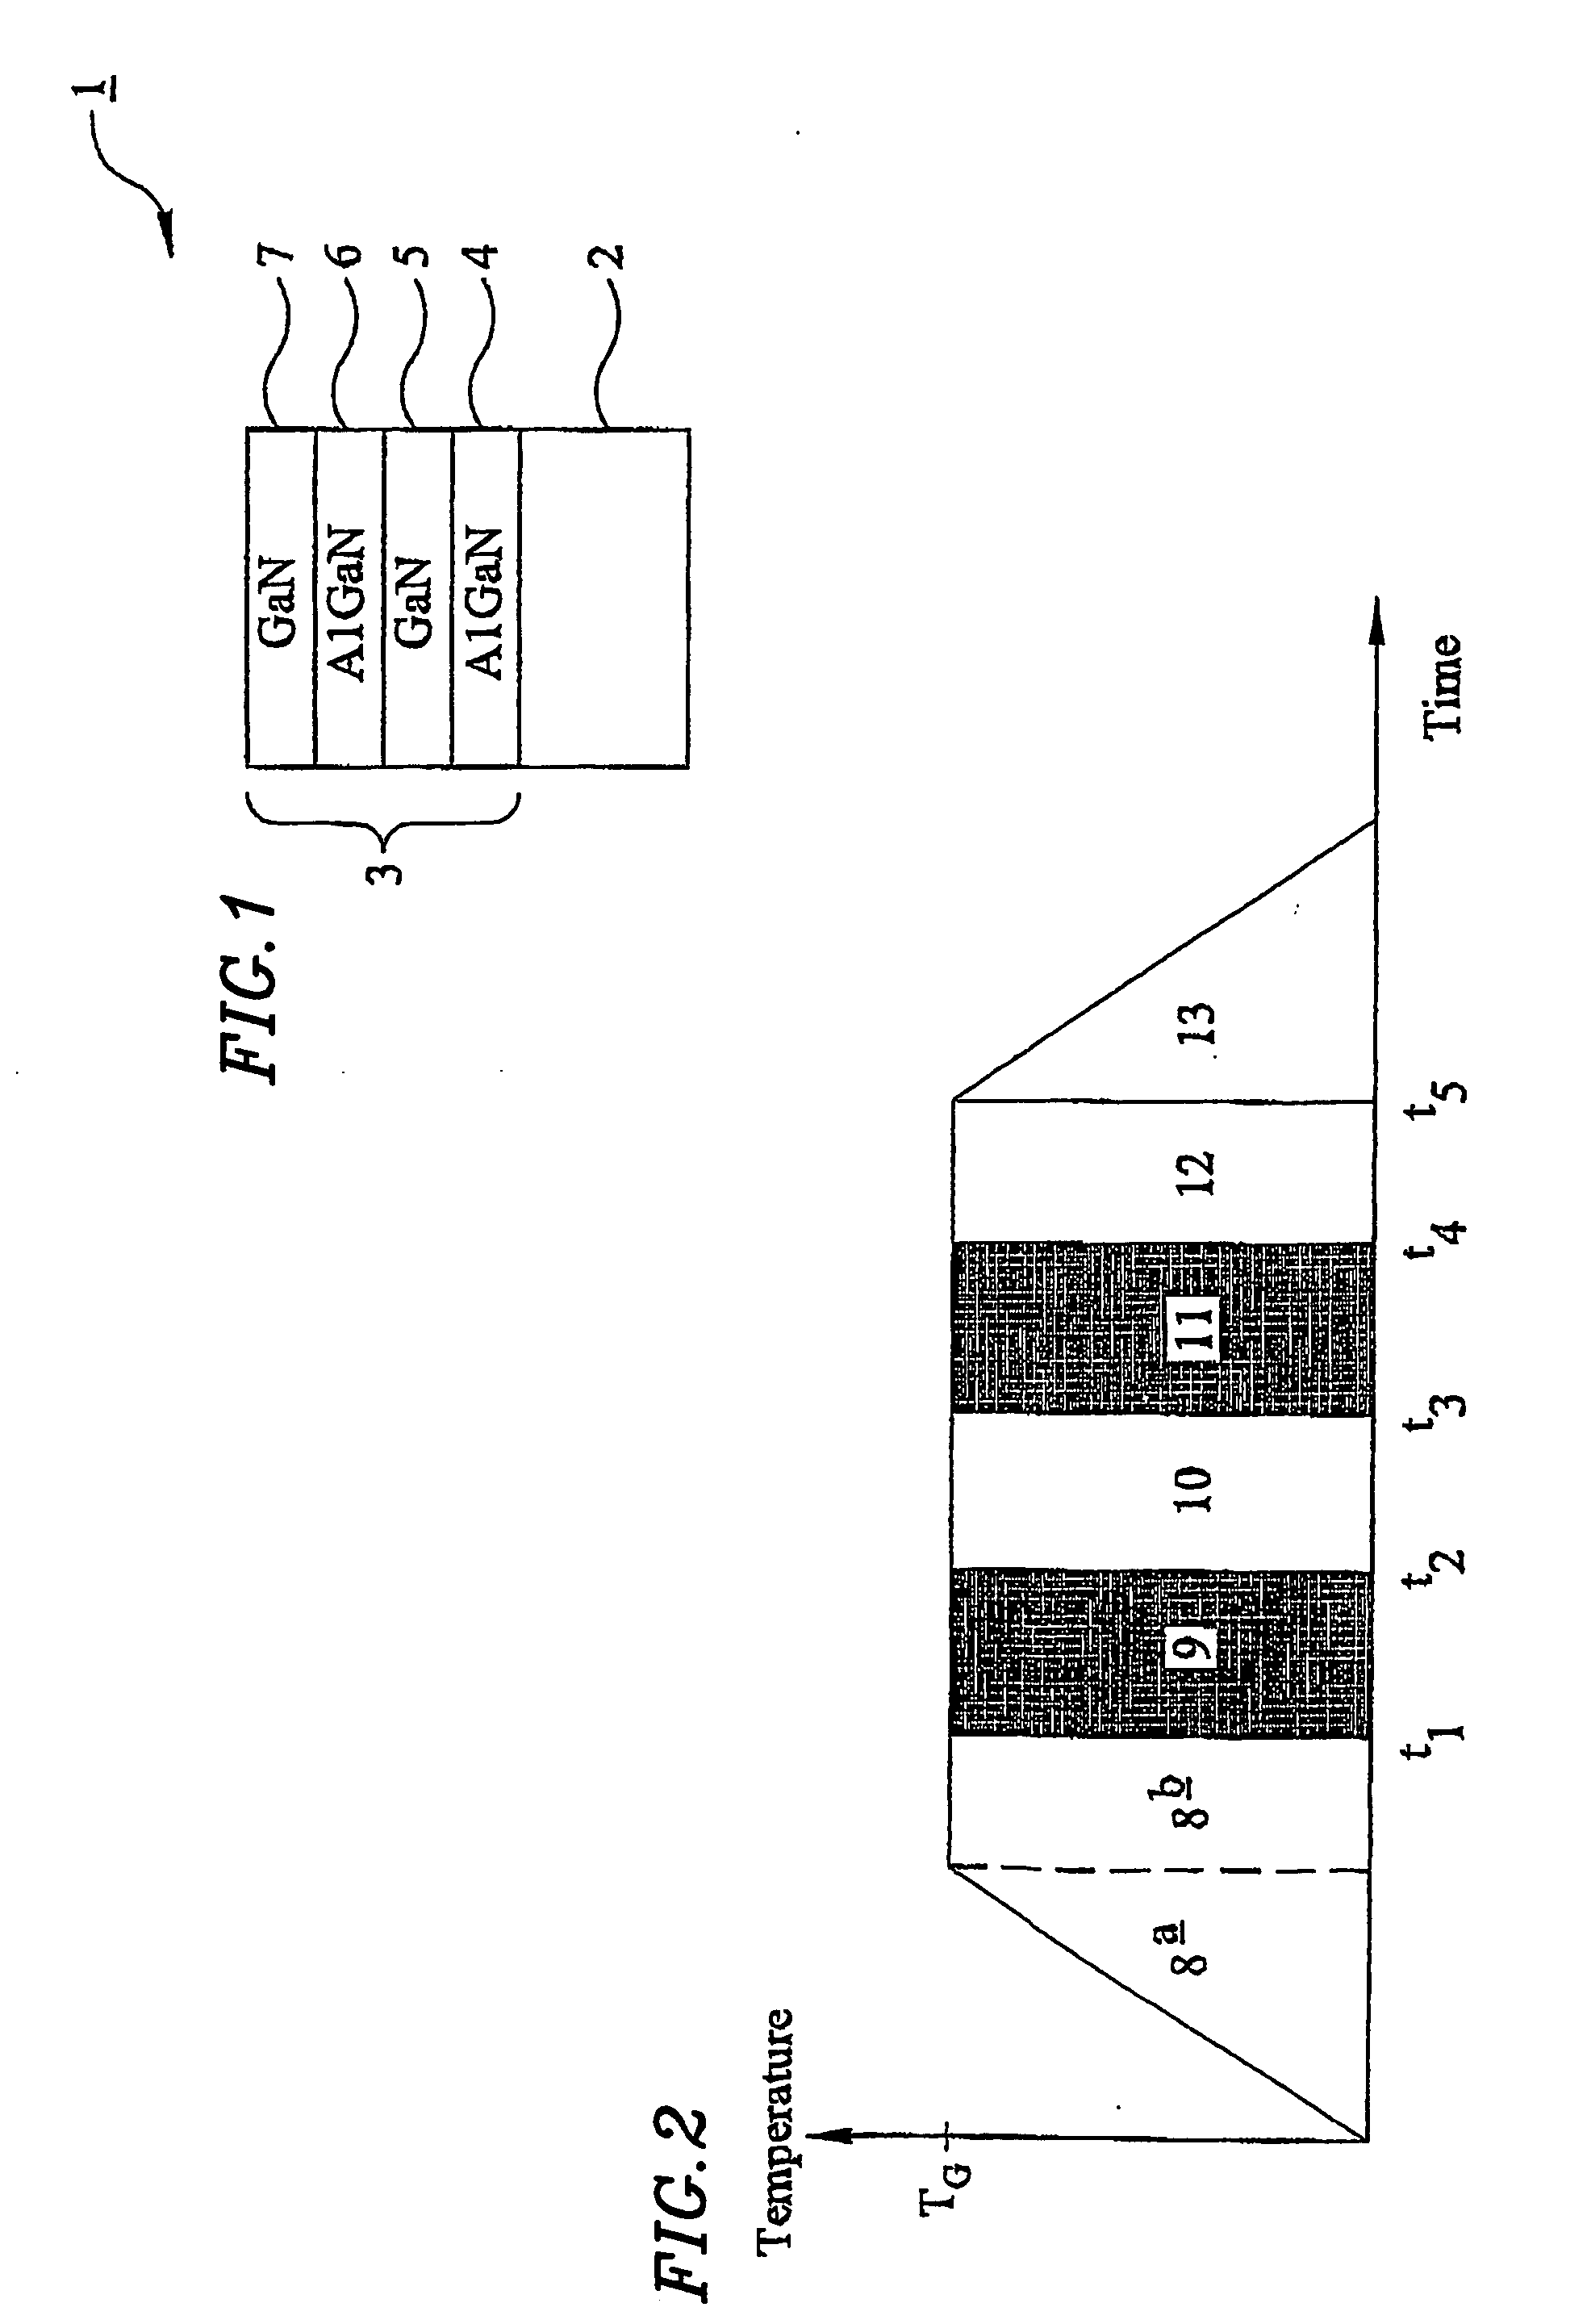 Mbe growth of an algan layer or algan multilayer structure